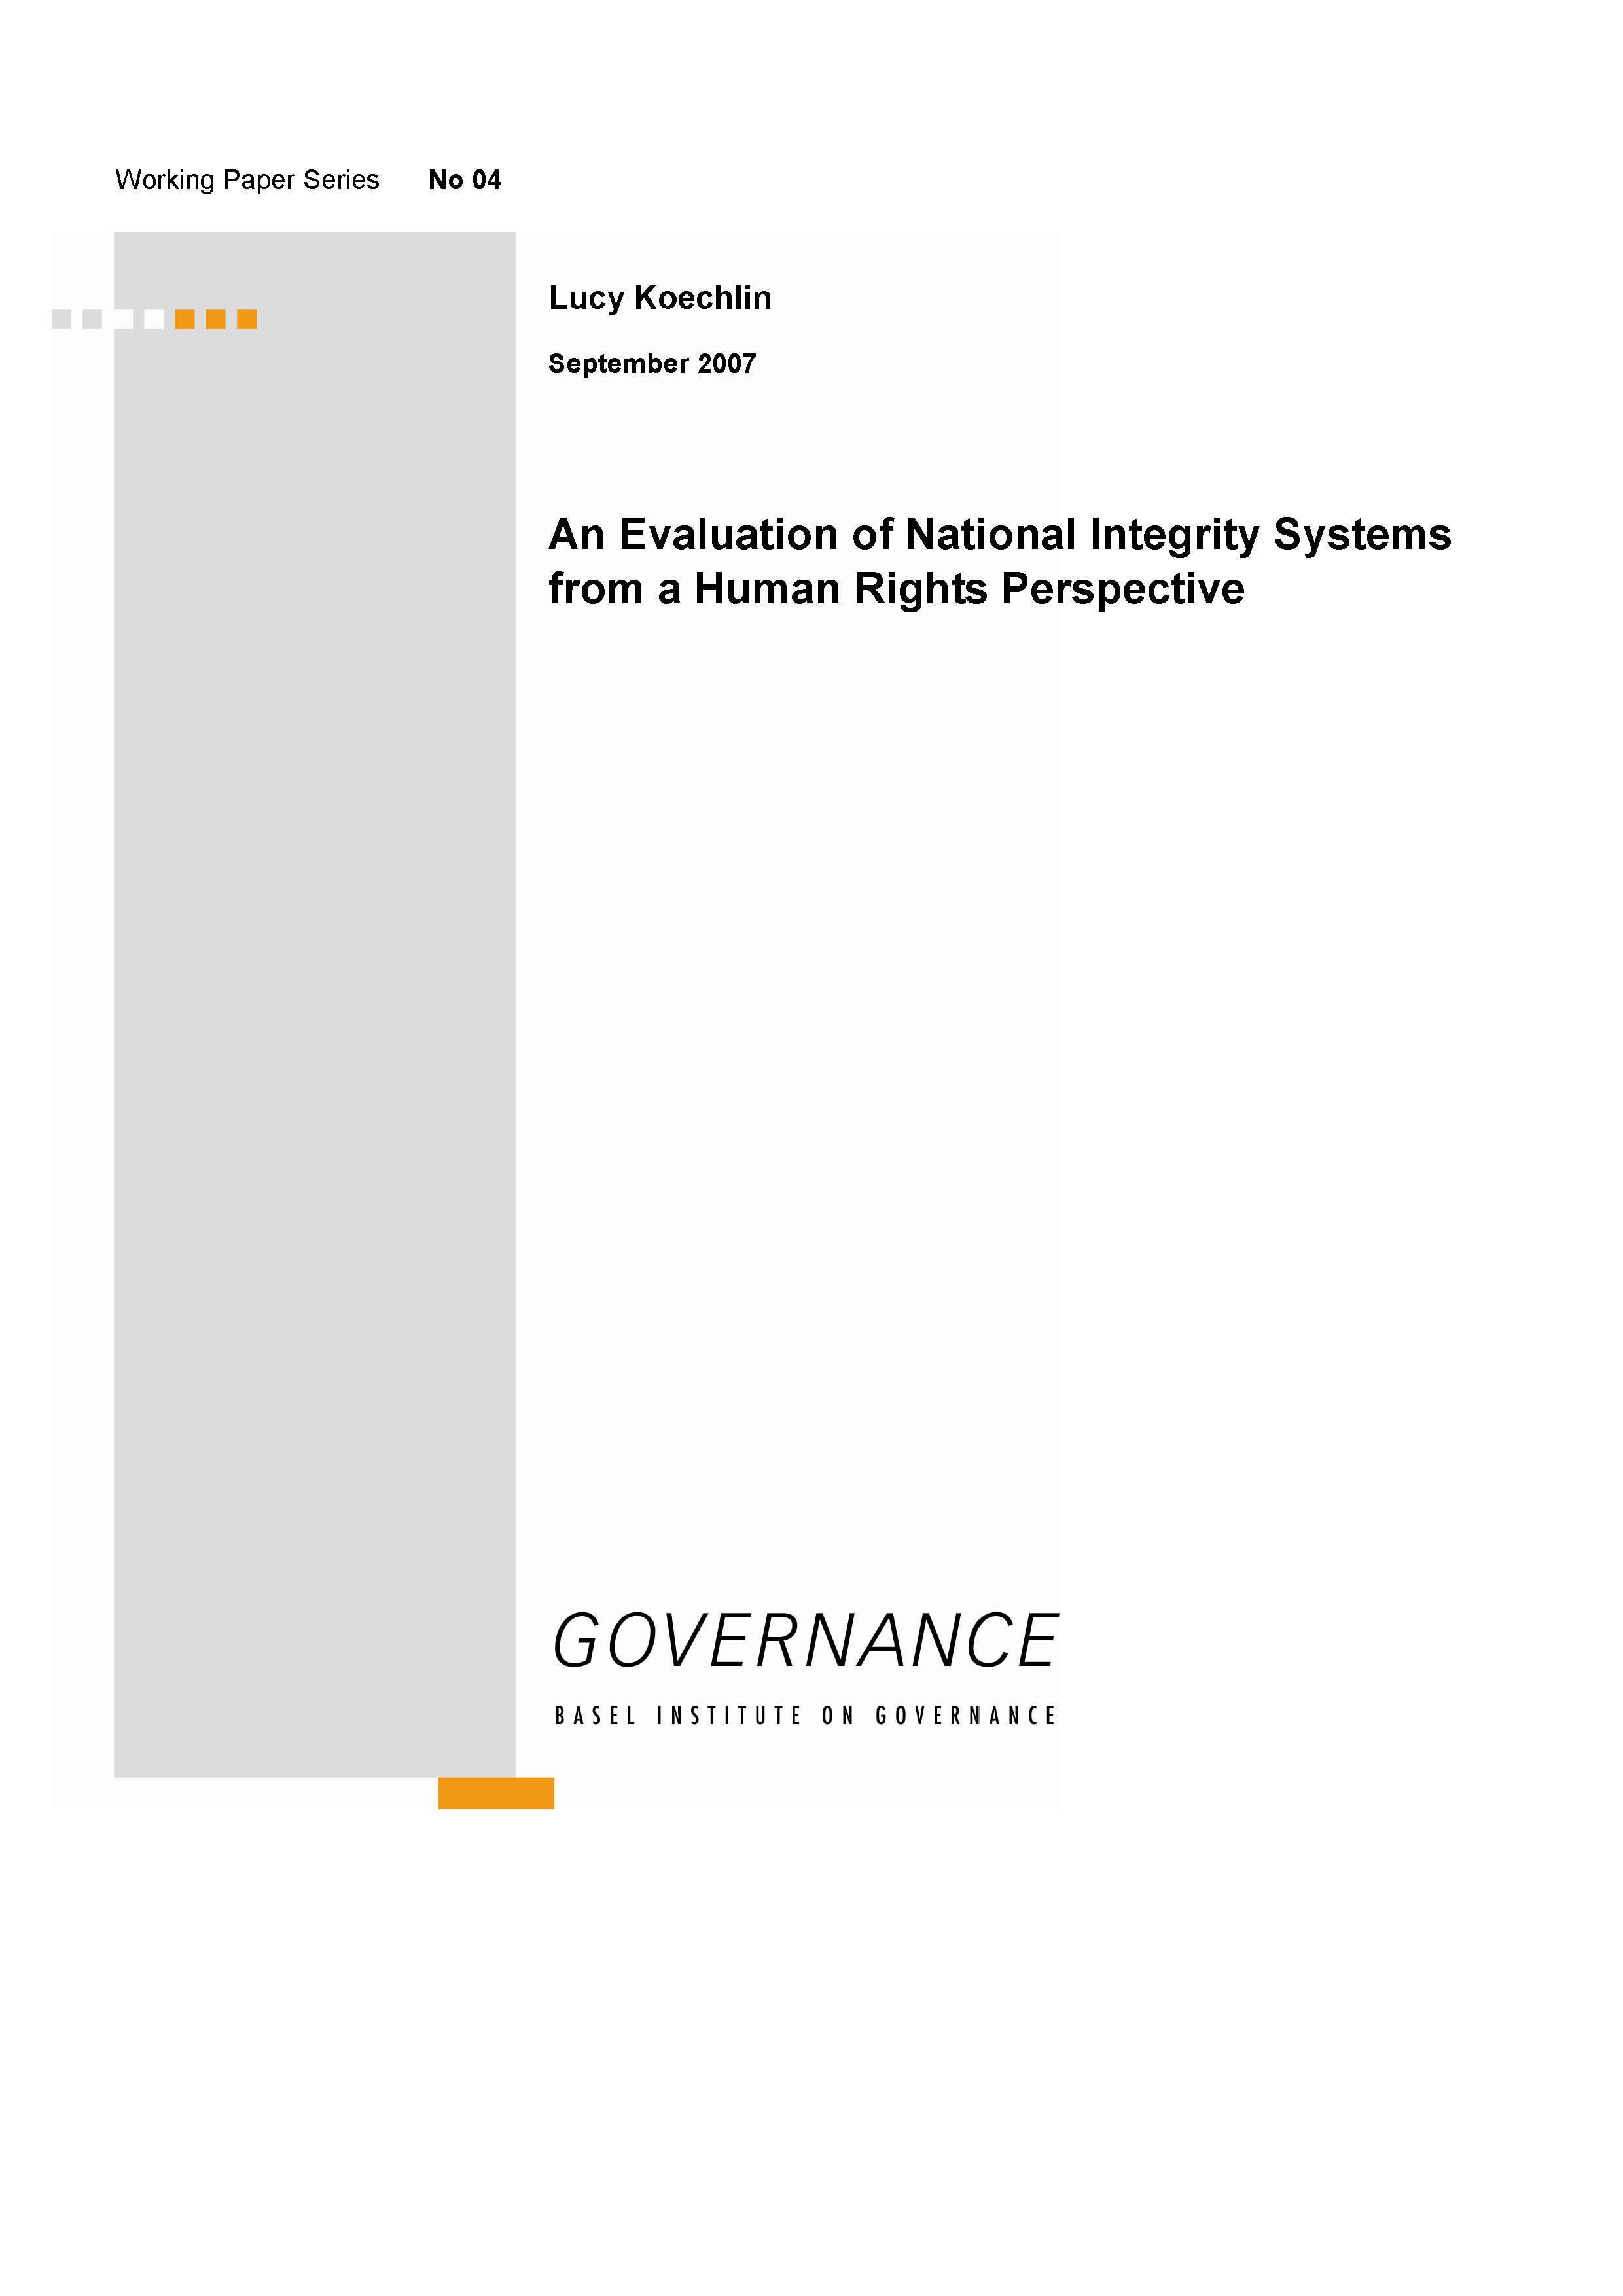 Working Paper 4: An evaluation of national integrity systems from a human rights perspective